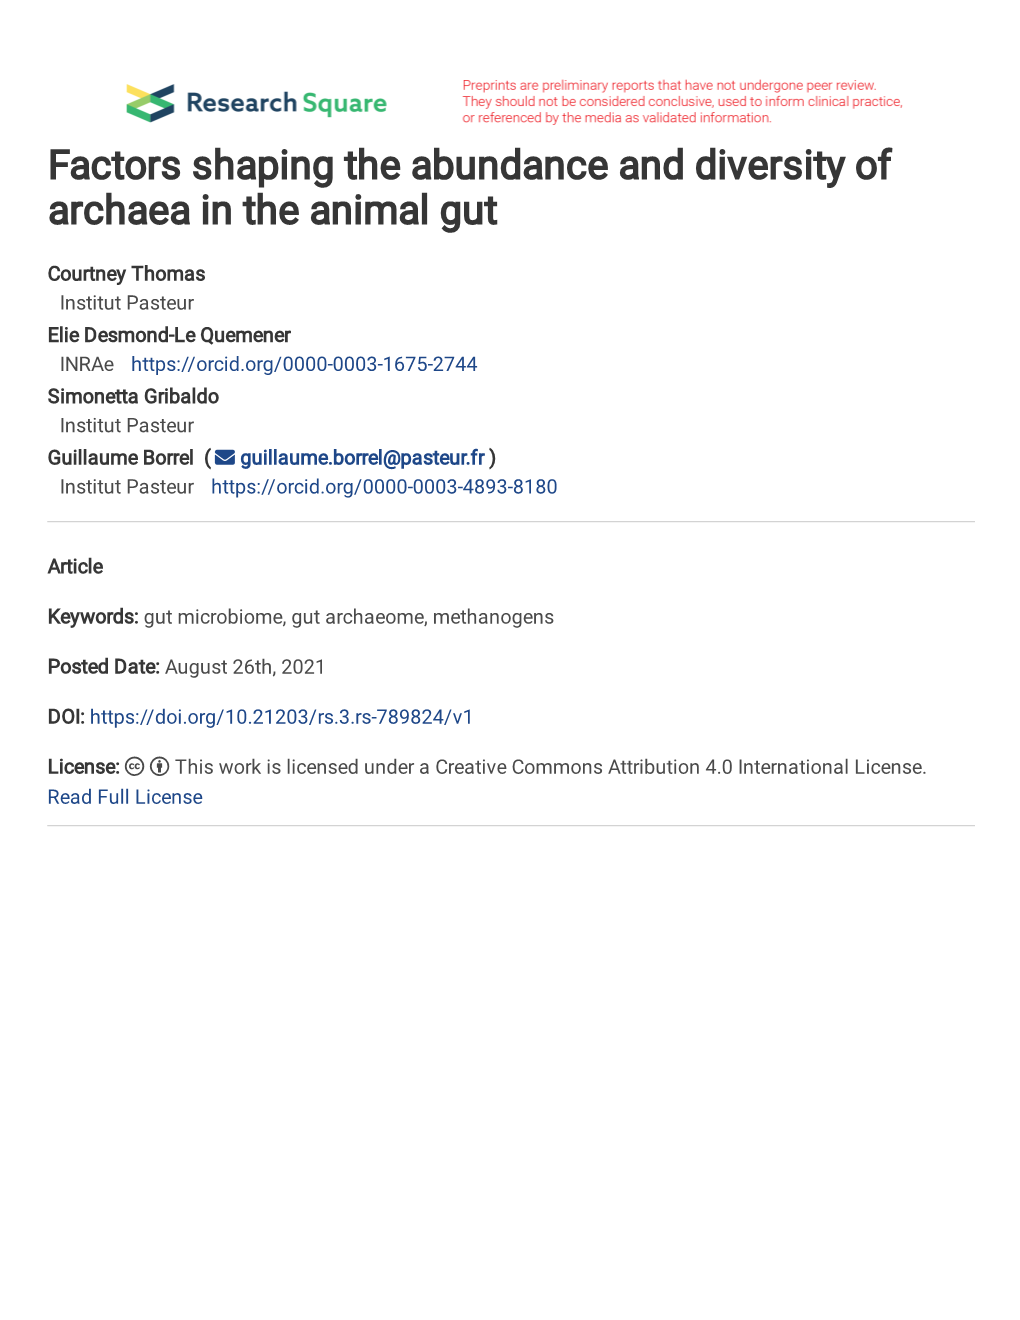 Factors Shaping the Abundance and Diversity of Archaea in the Animal Gut